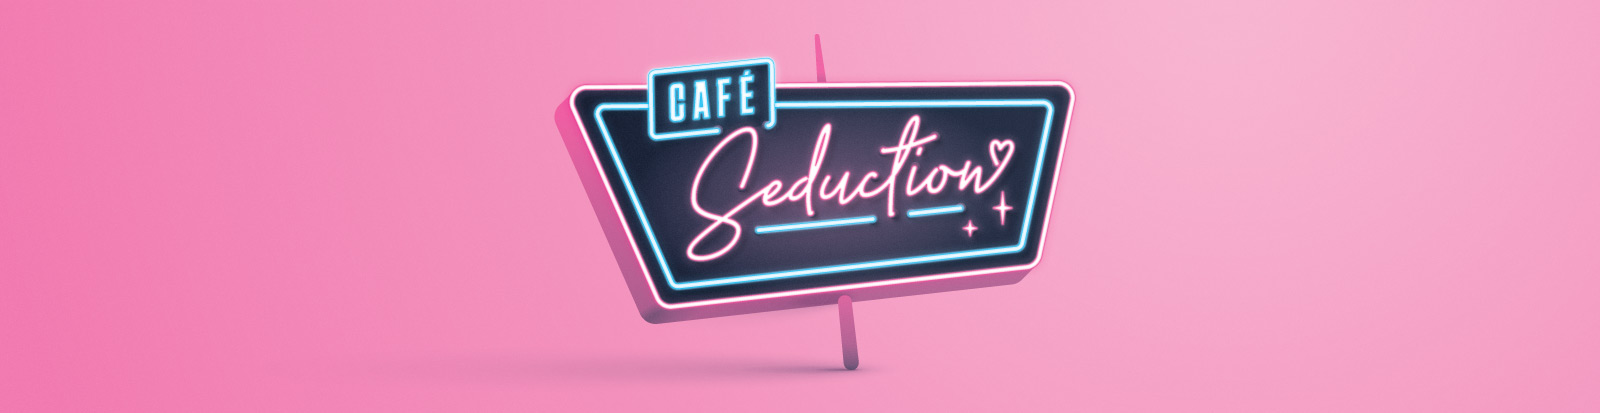 Welcome to Seduction Cafe Store